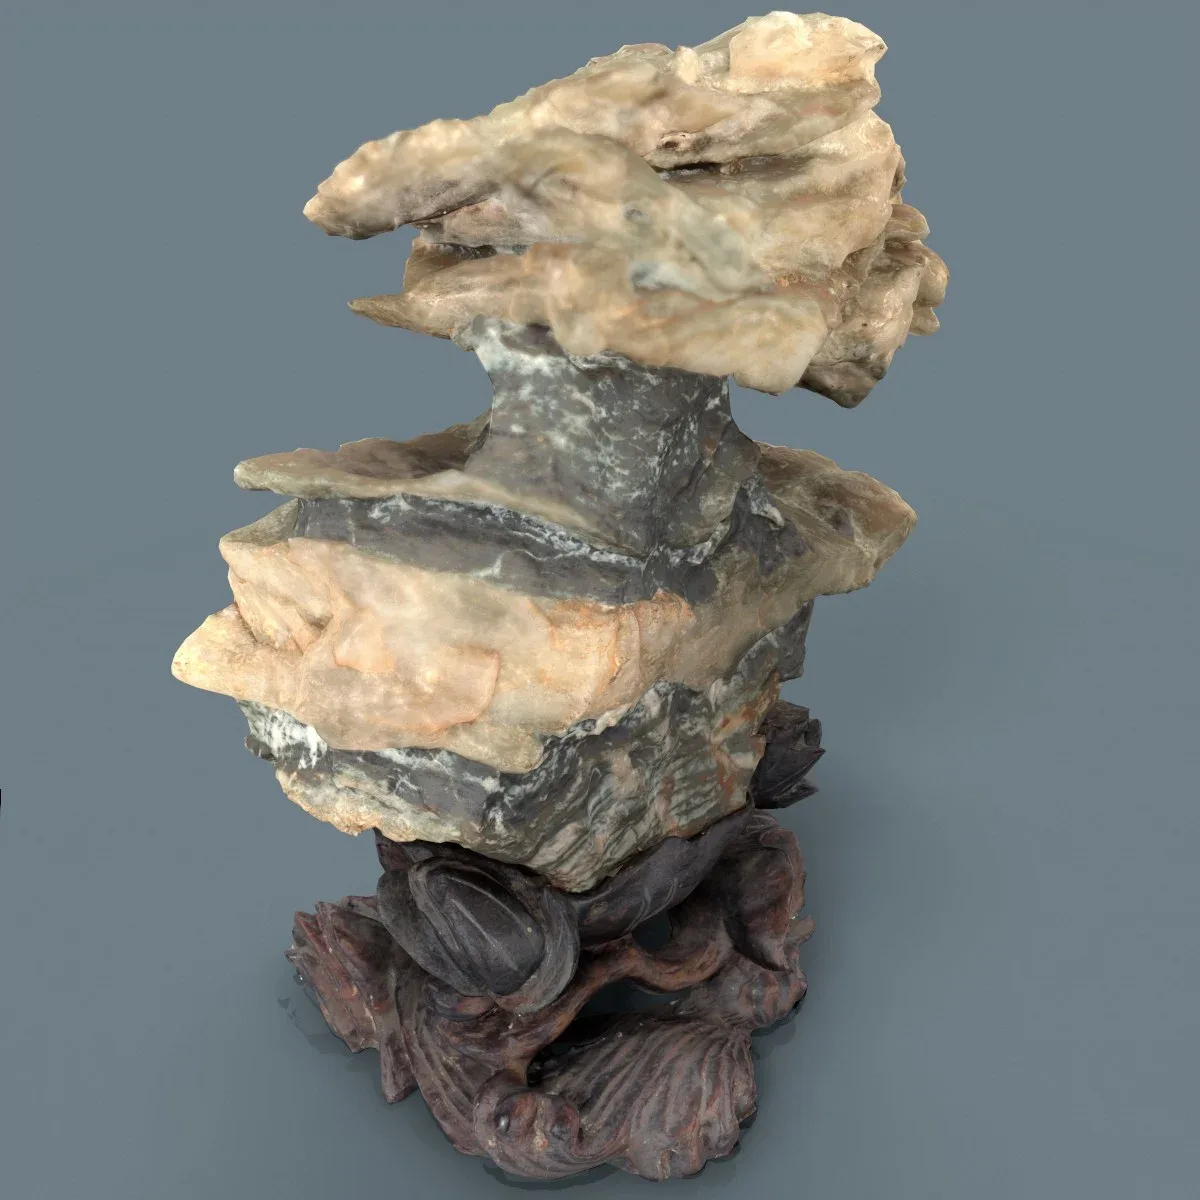 Suiseki Stone Collection from Japan - High-Quality 3D Model with Metallic-Roughness PBR Textures for Games, VR, and Art Projects